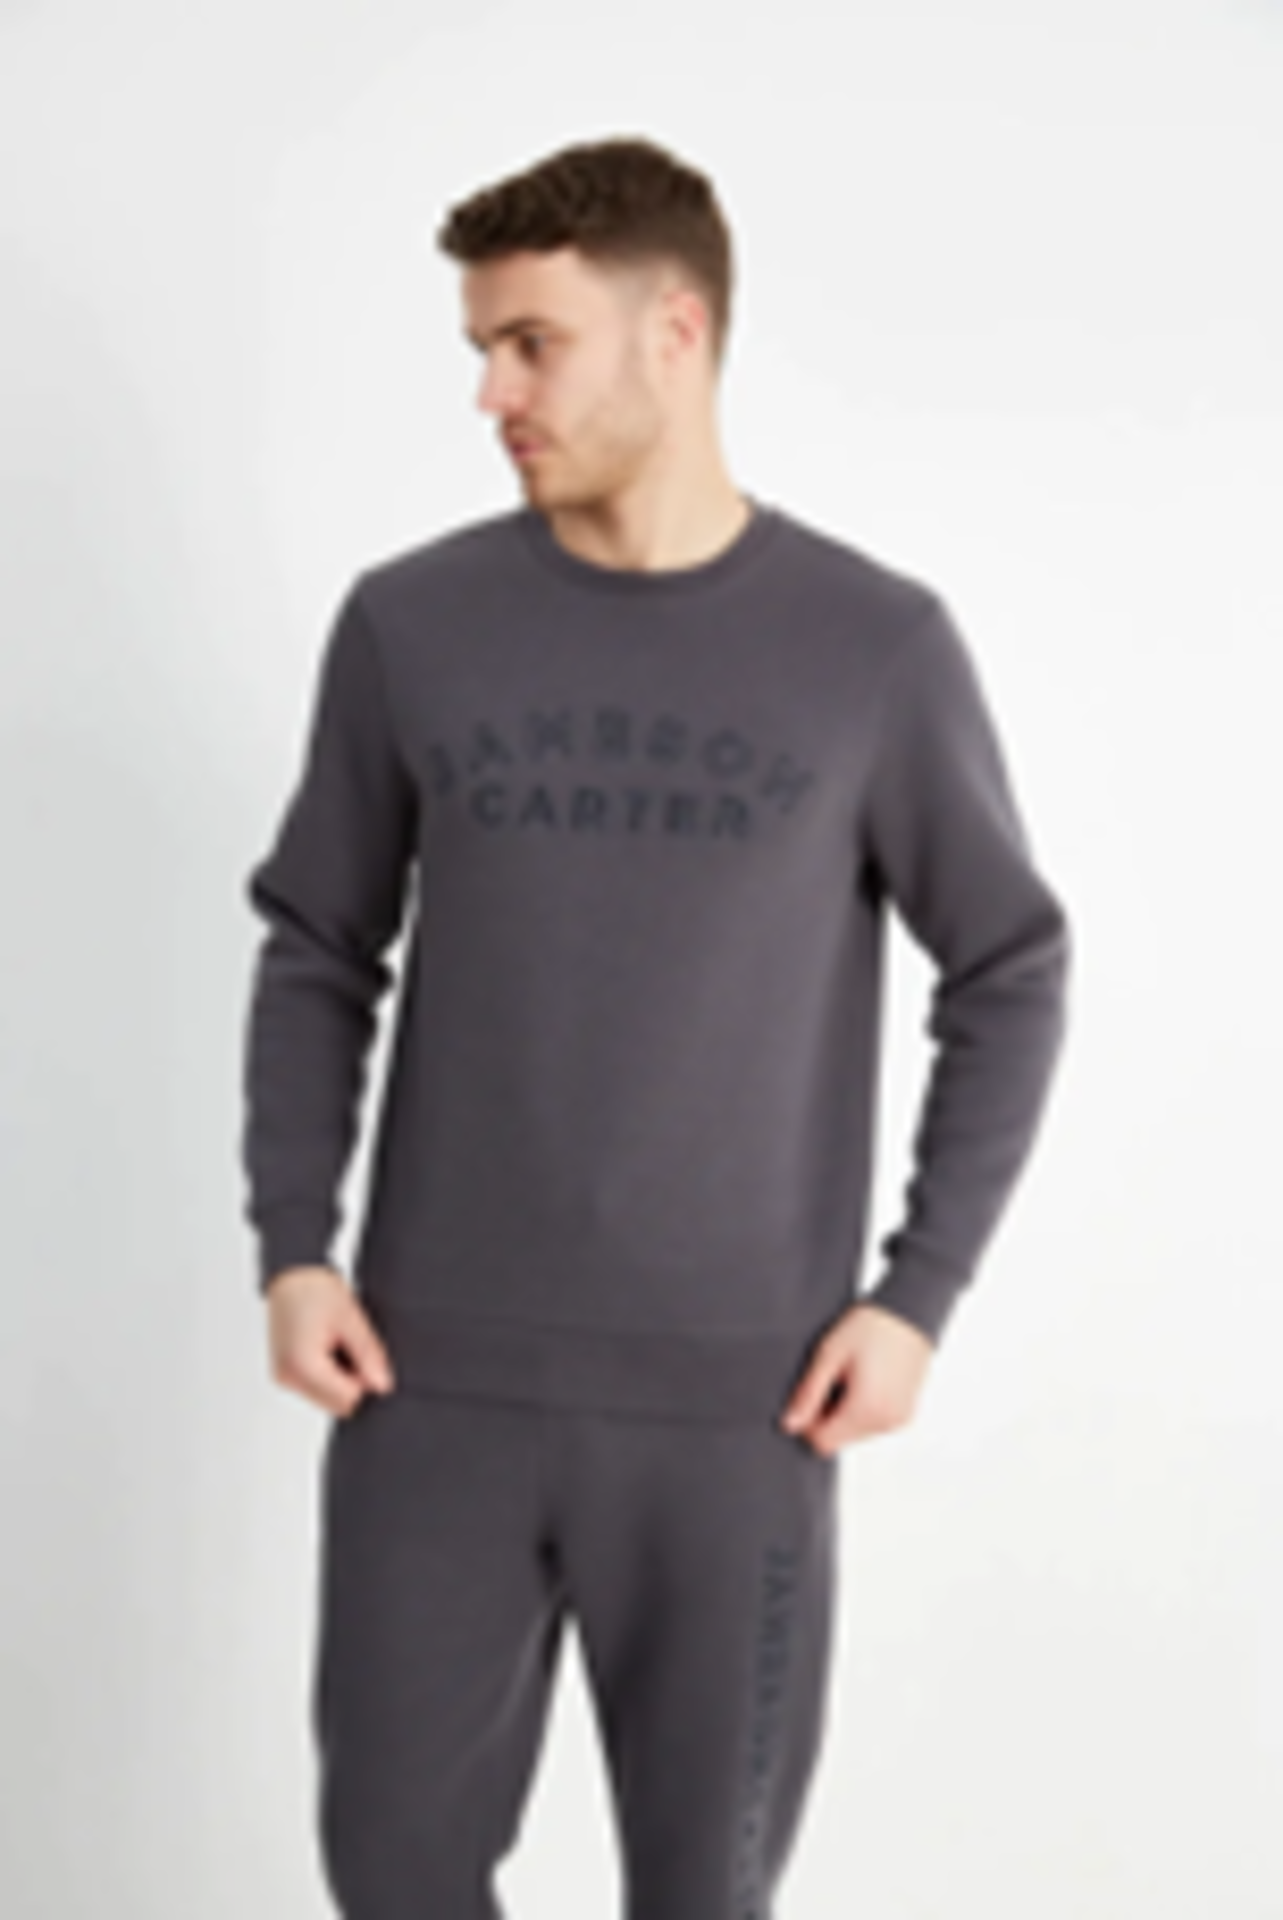 20 x NEW MIXED ITEMS OF JAMESON CARTER STOCK. TO INCLUDE ITEMS SUCH AS: JACKETS, TRACKSUITS, JOGGING - Image 6 of 12